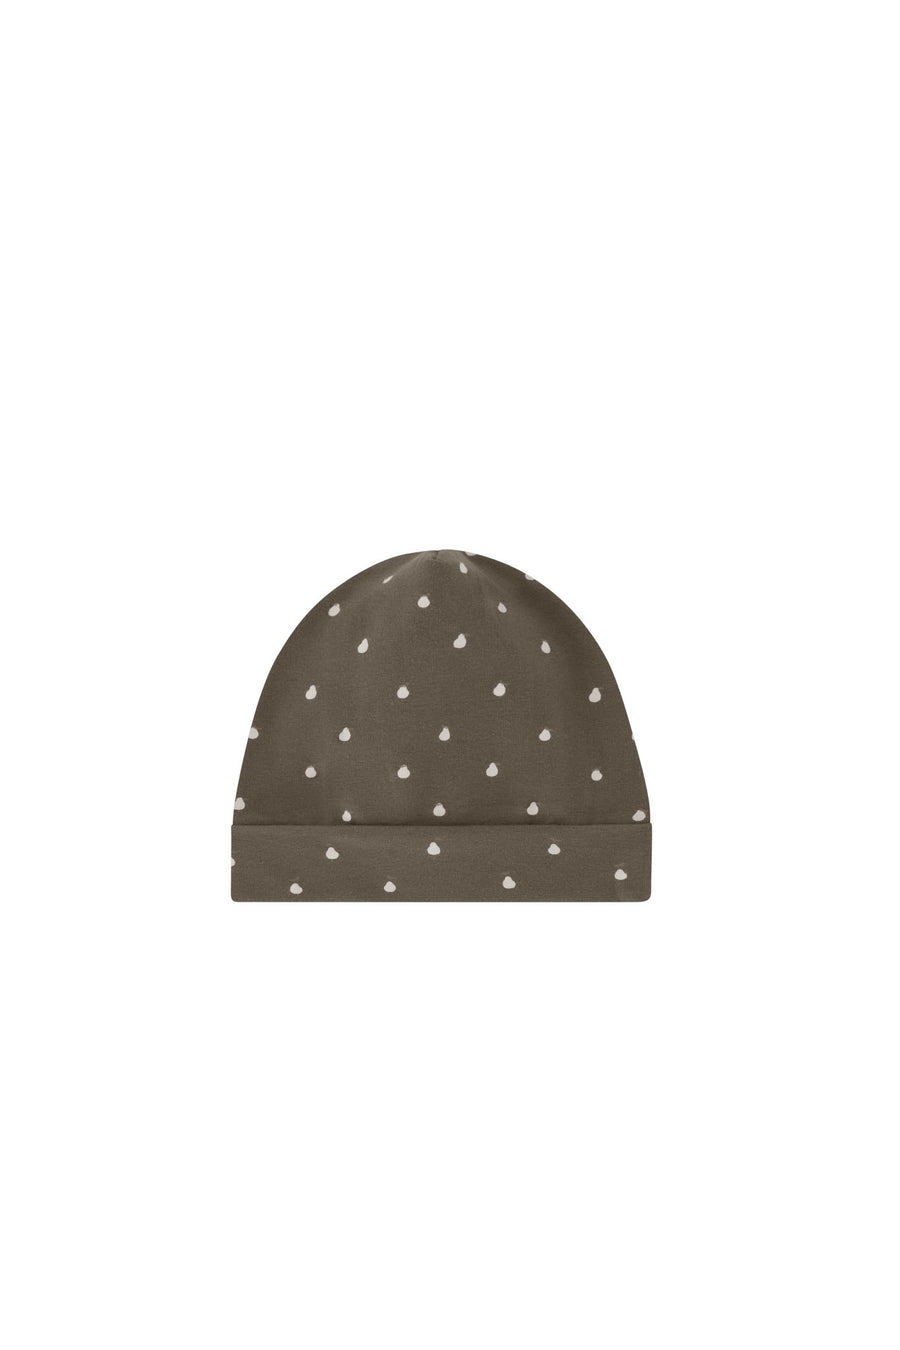 Organic Cotton Reese Beanie - Pears Thyme Childrens Beanie from Jamie Kay NZ